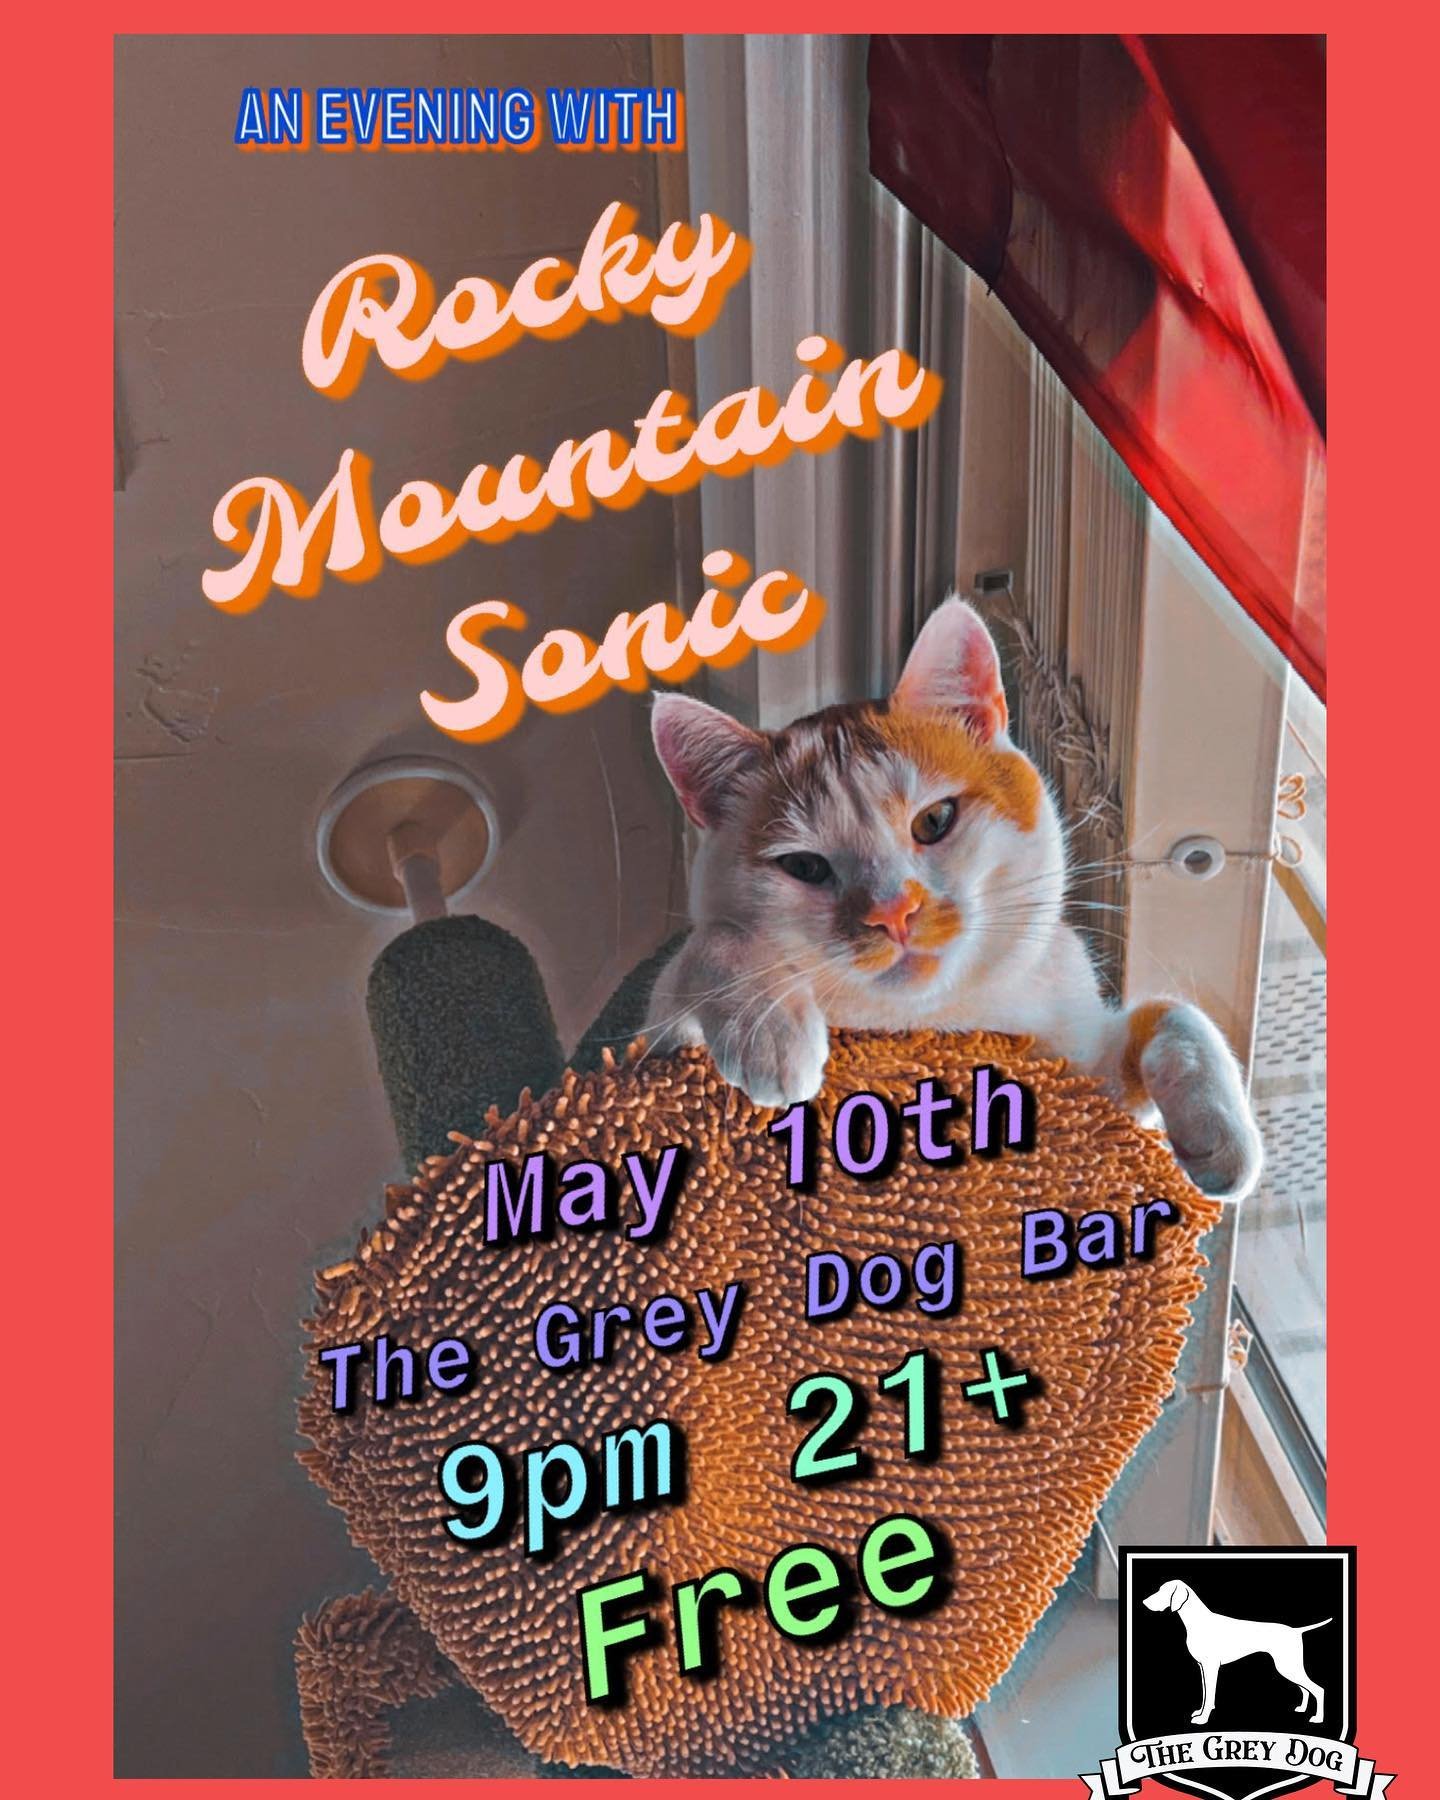 This Friday May 10th Rocky Mountain Sonic will be paying starting at 9pm! ⛰️👽